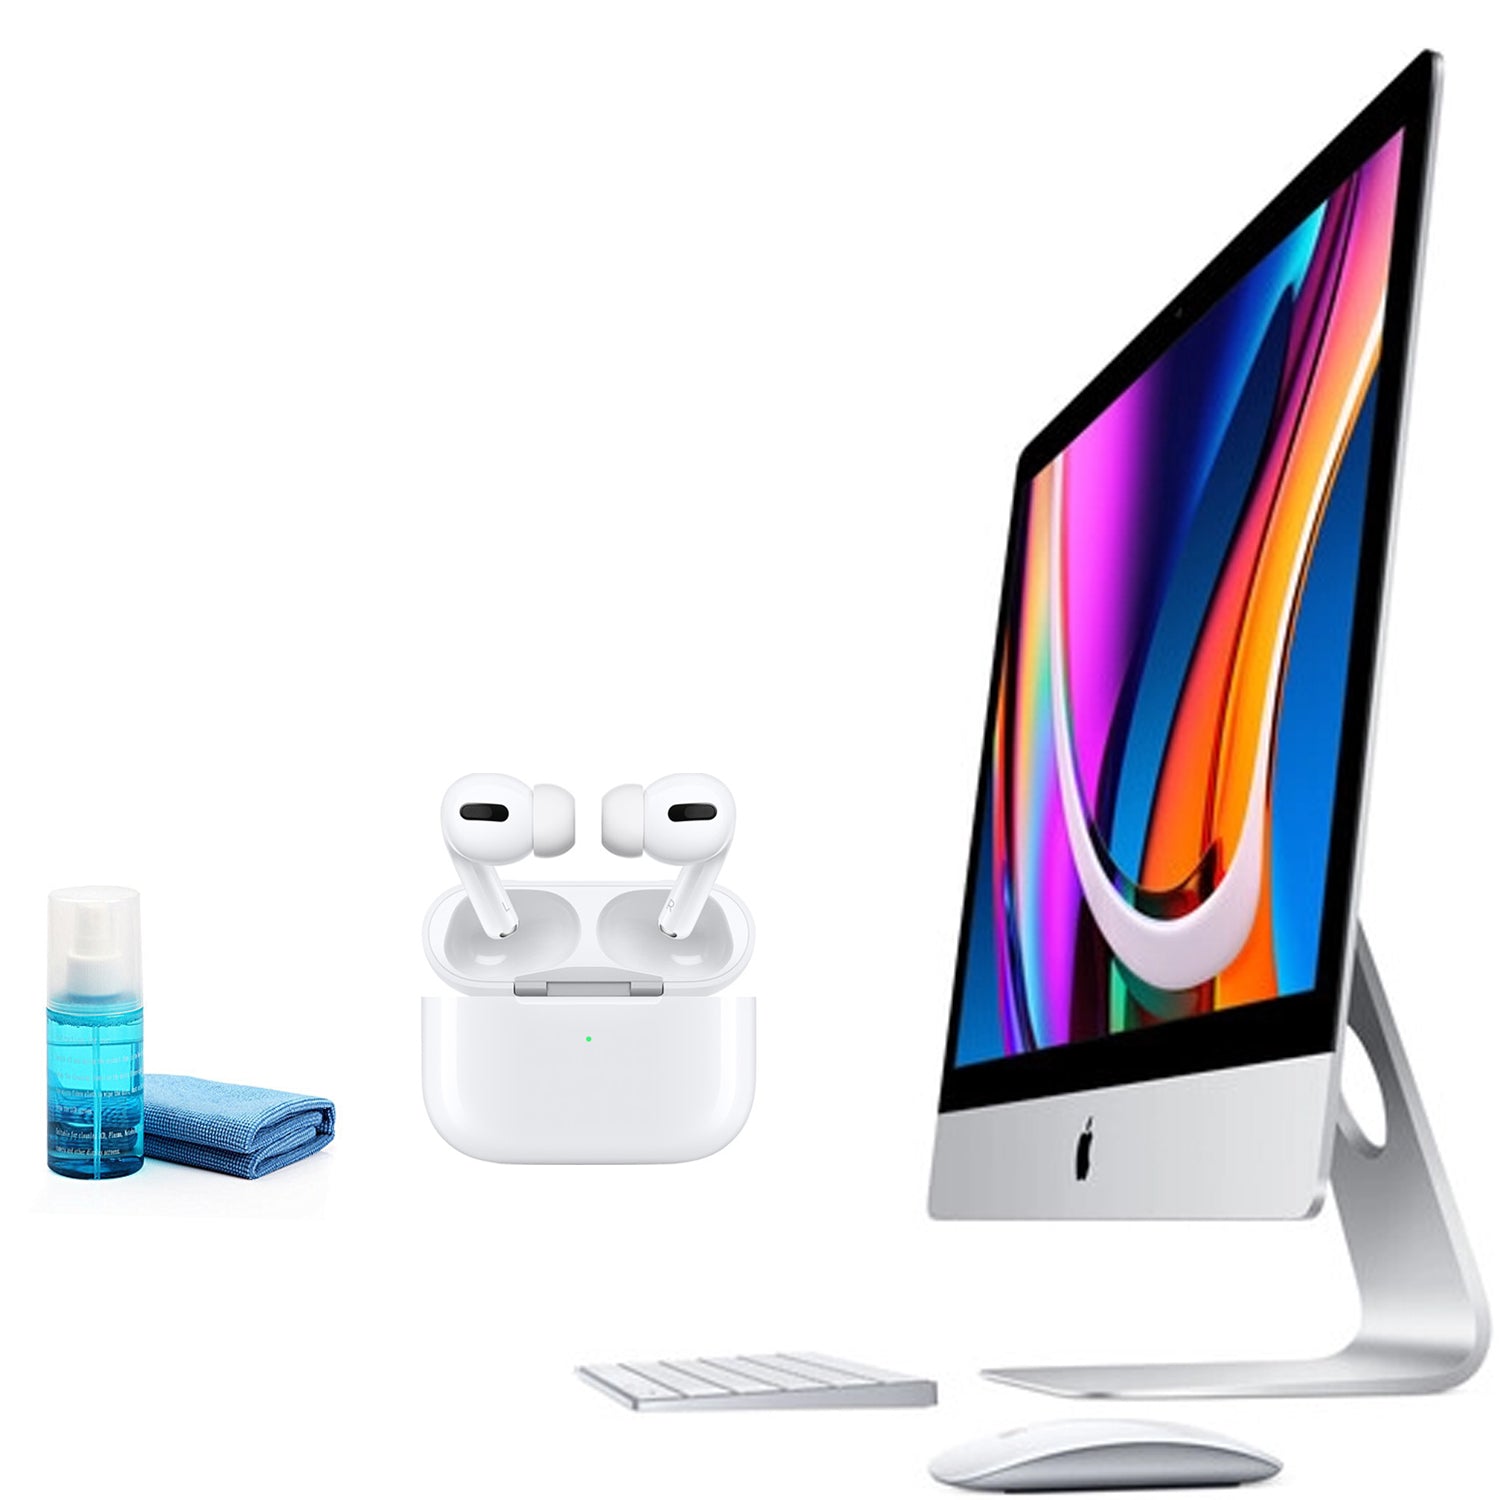 Apple iMac 27 Inch with Retina 5K Display (Mid 2020) with Apple Airpods Pro Creative Bundle